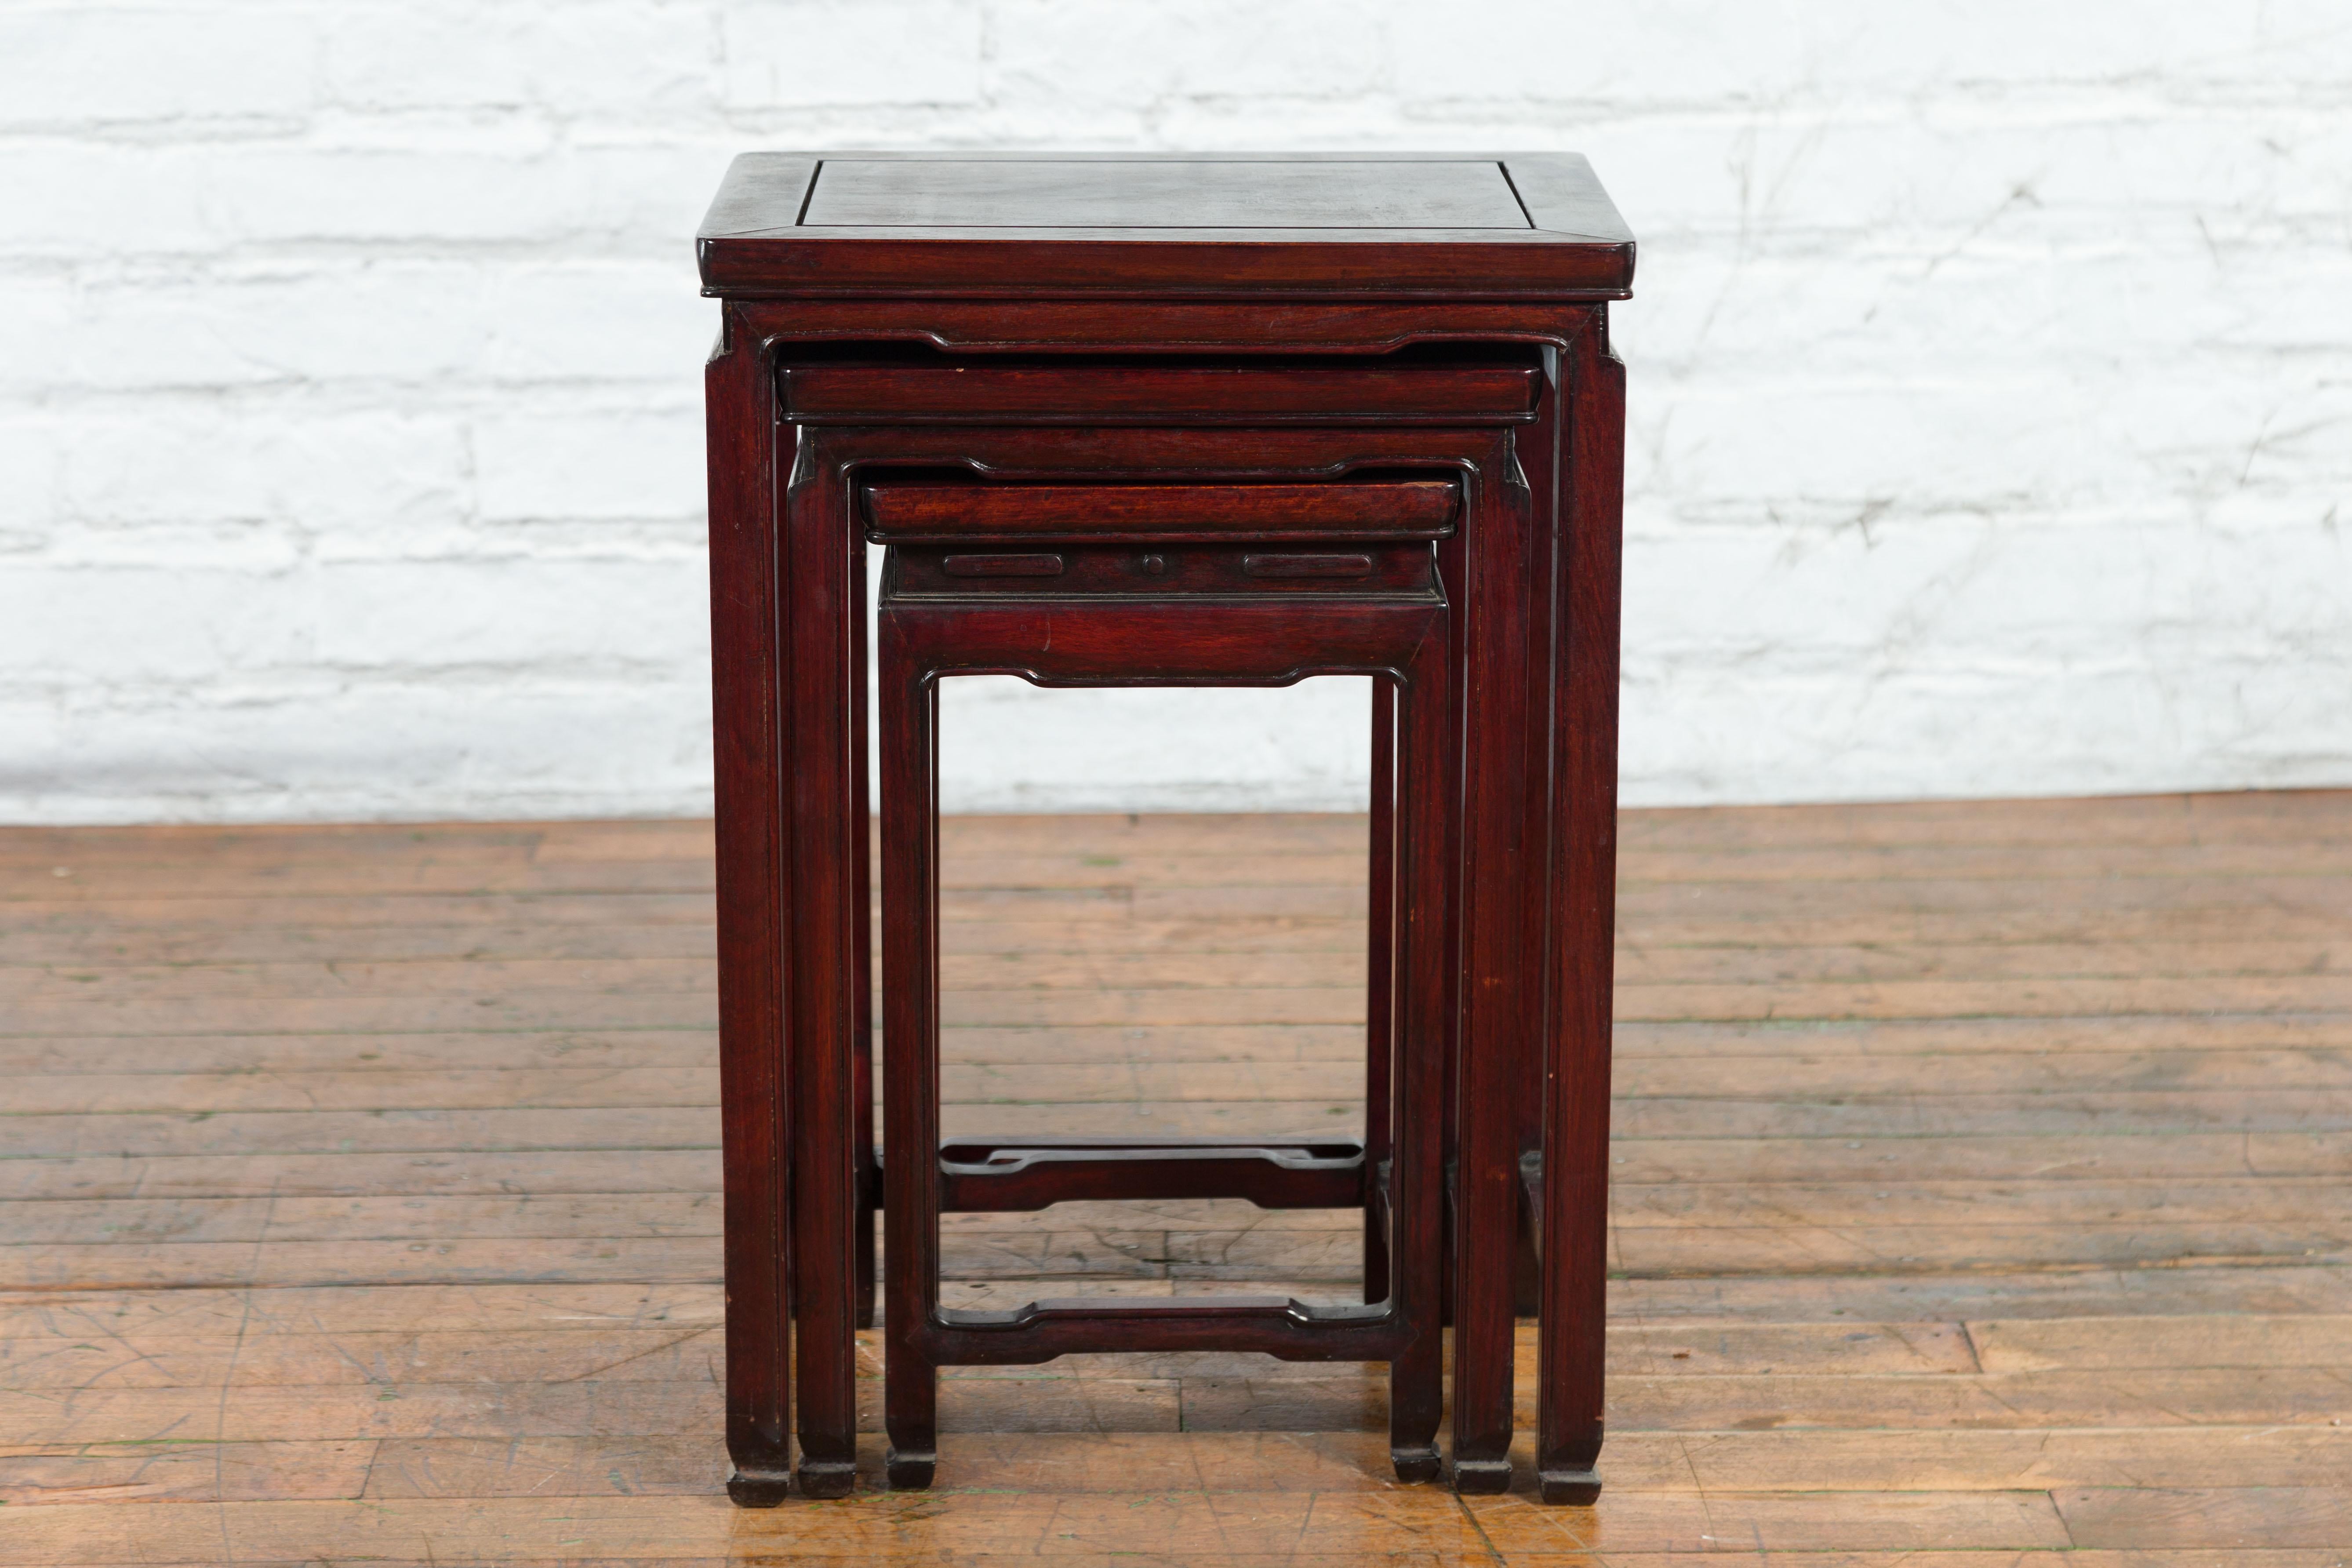 A set of three vintage Chinese rosewood nesting side tables from the mid-20th century with dark reddish brown patina, curving waisted apron, straight legs, horse hoof feet and side stretchers. Created in China during the midcentury period, each of